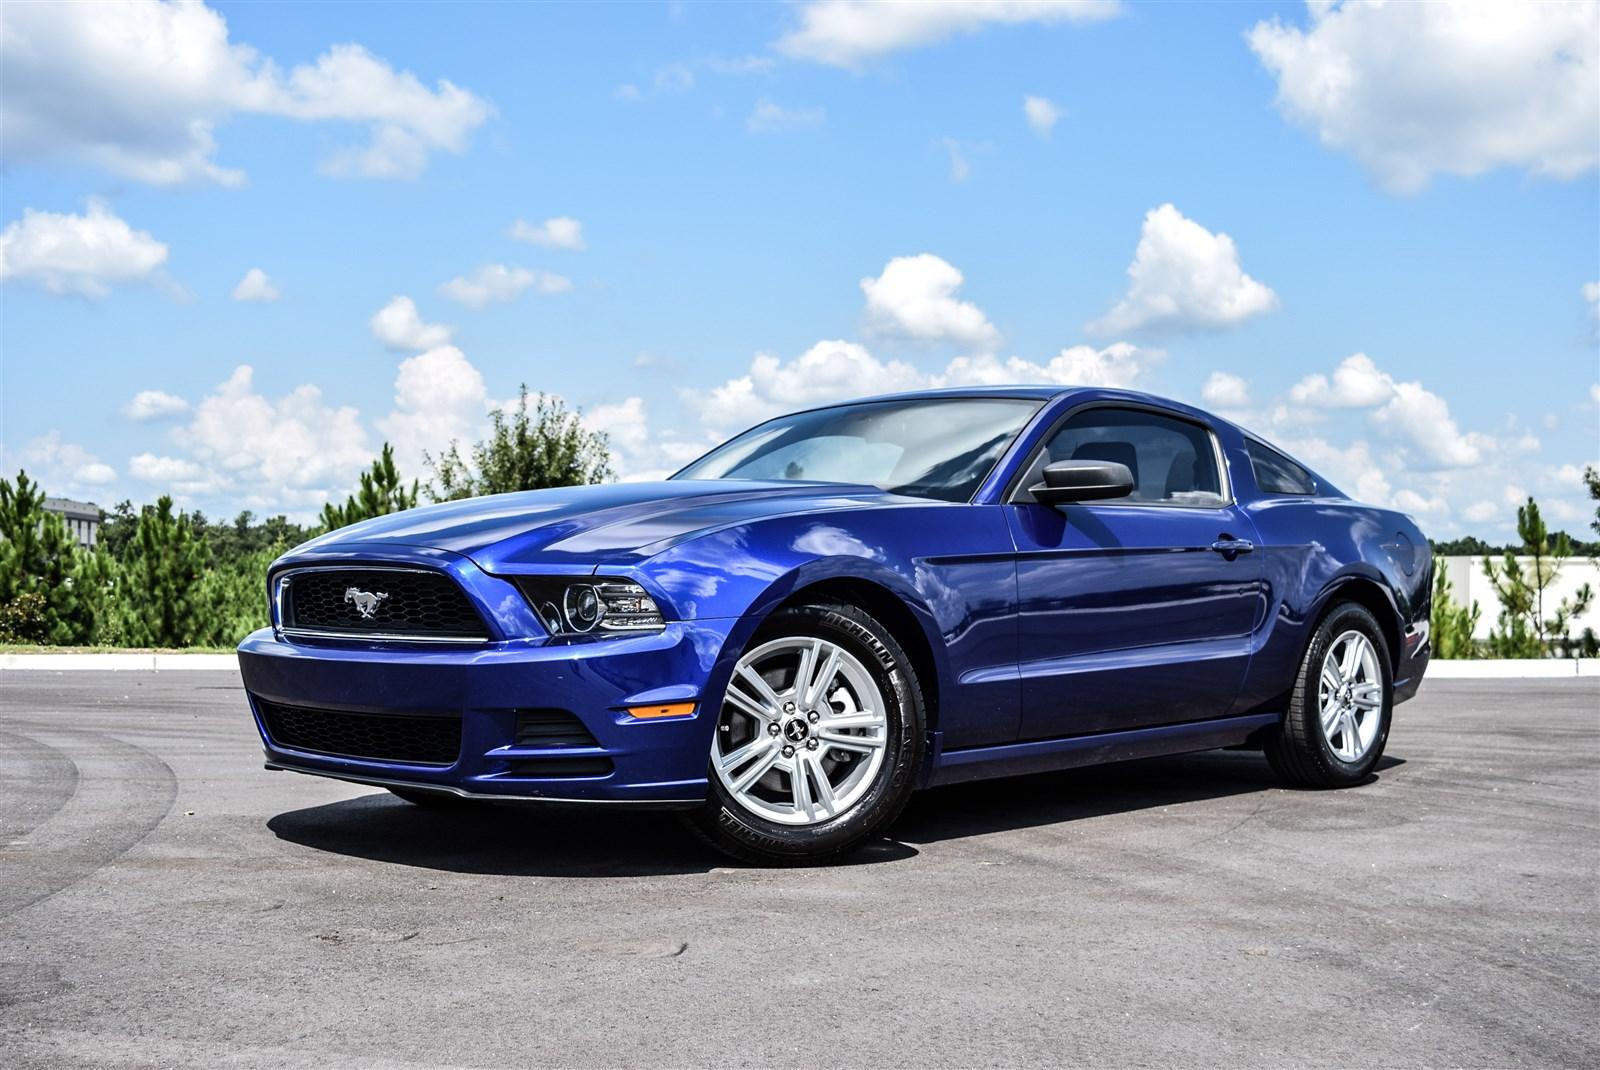 Used 2013 Ford Mustang V6 for sale Sold at Gravity Autos Marietta in Marietta GA 30060 8